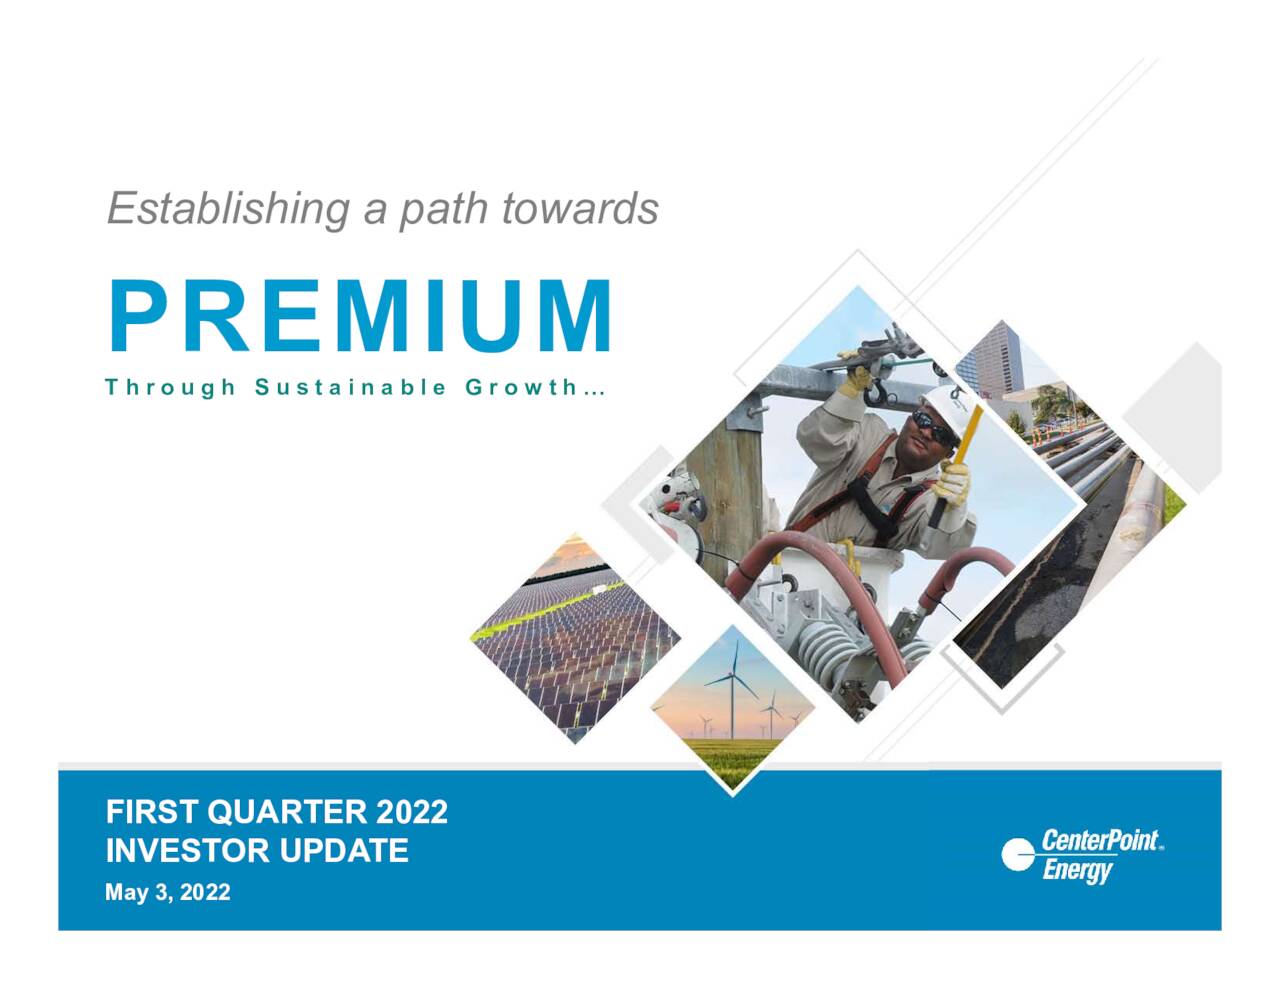 centerpoint-energy-inc-2022-q1-results-earnings-call-presentation-nyse-cnp-seeking-alpha